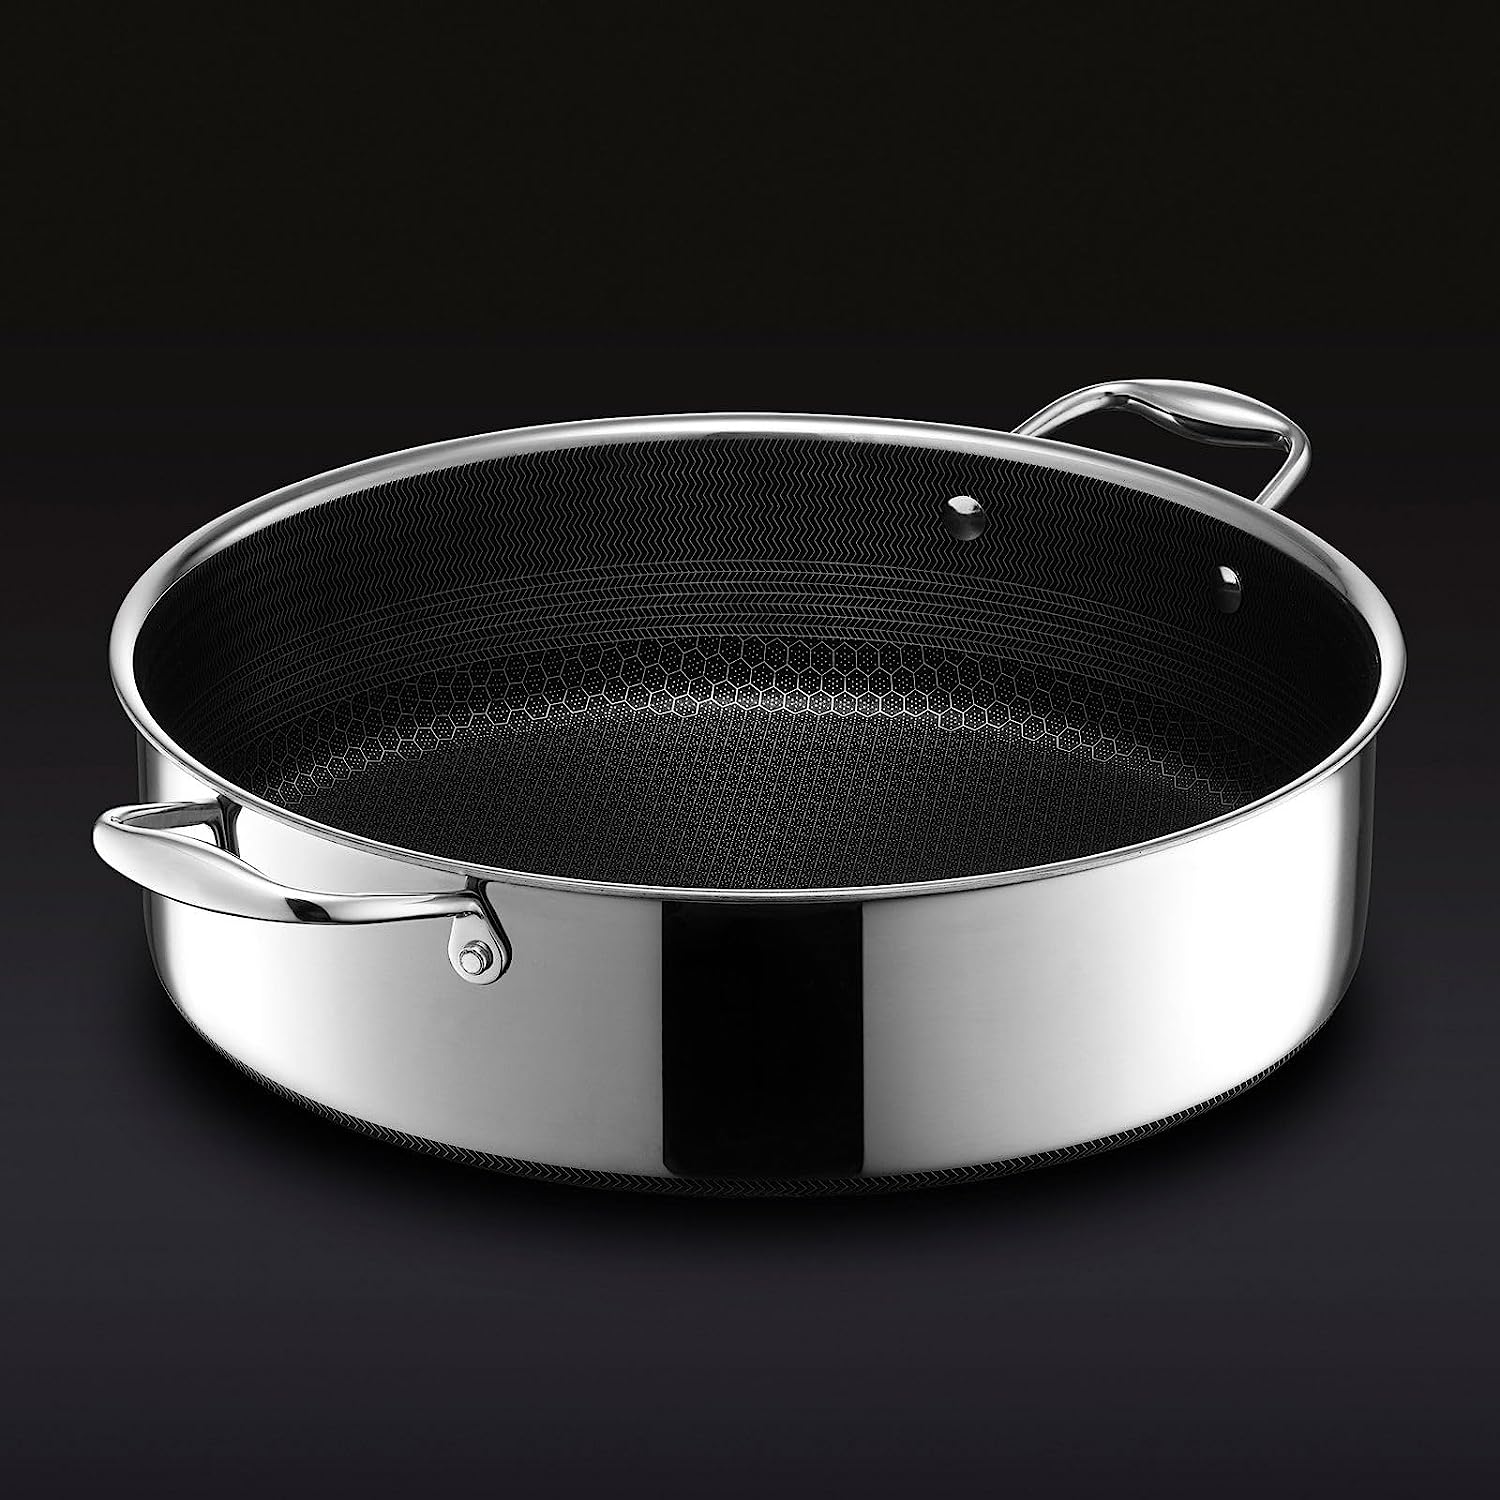 https://bigbigmart.com/wp-content/uploads/2023/09/HexClad-7-Quart-Hybrid-Saute-Pan-Nonstick-Chicken-Fryer-Dishwasher-and-Oven-Friendly-Compatible-with-All-Cooktops1.jpg